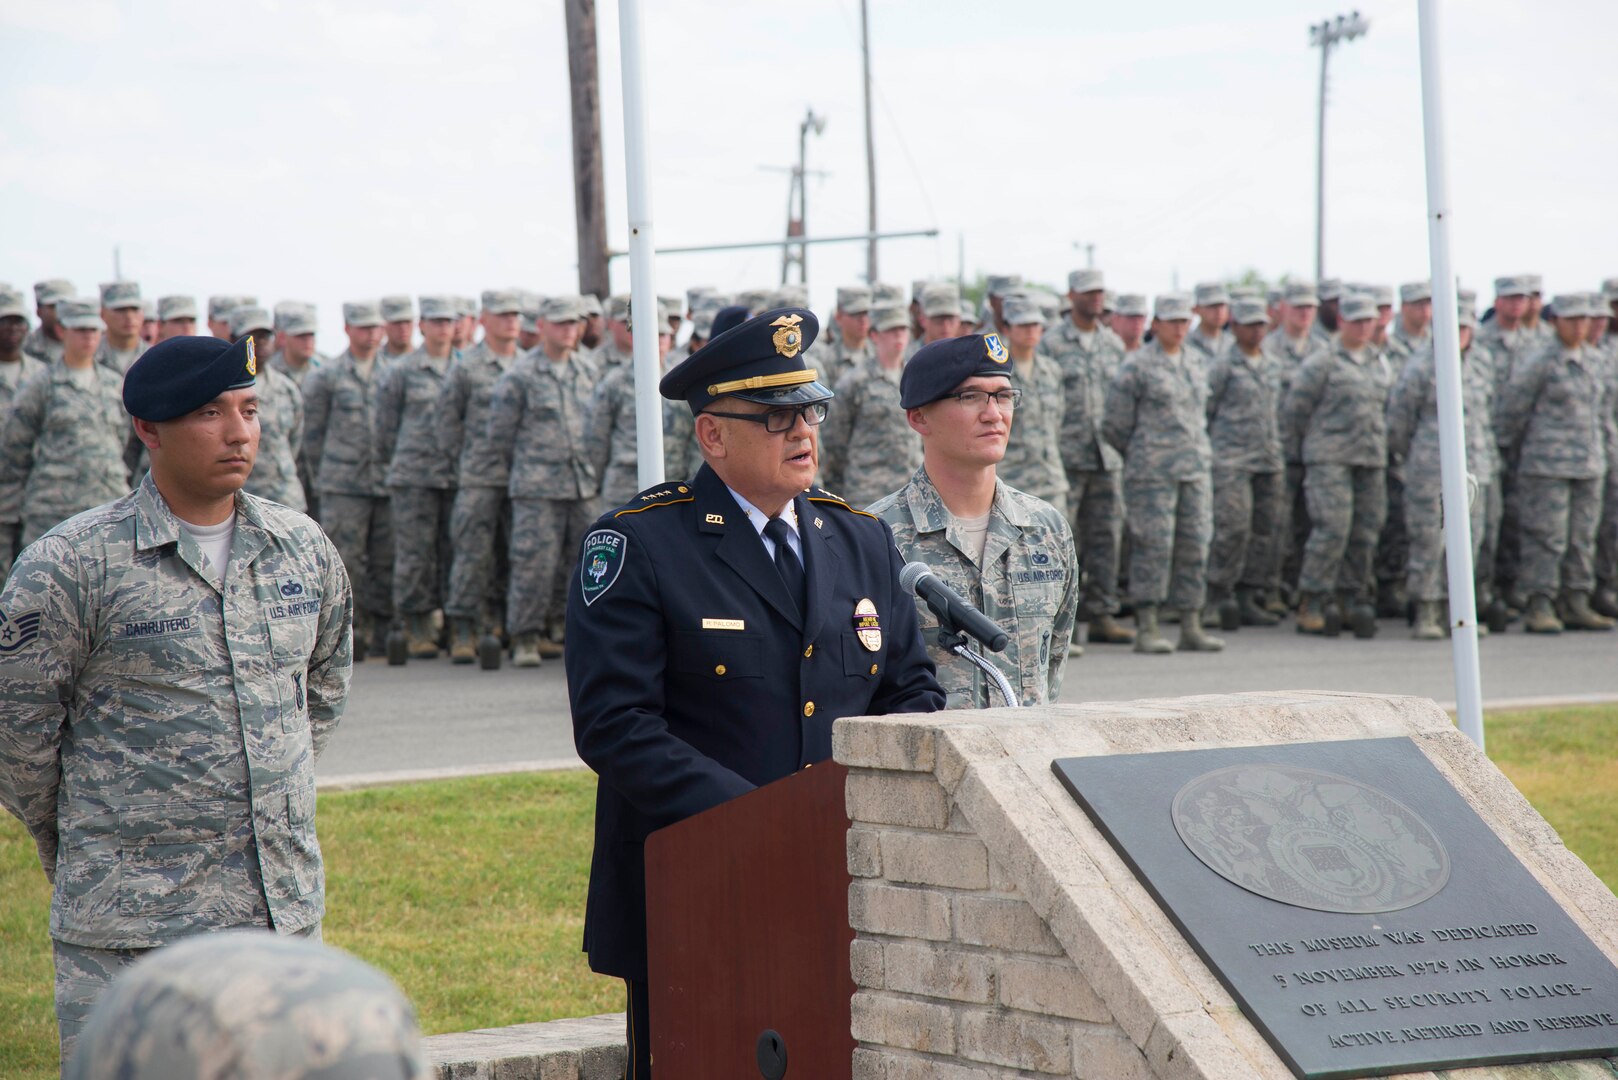 Richard Palomo, Chief of Police for the Southwest Independent School District Police Department, delivers a speech at the Joint Base San Antonio Police Week retreat ceremony held in honor of fallen officers May 15, 2017, outside the Security Forces Museum at Joint Base San Antonio-Lackland. JBSA security forces members and military police officers joined local police departments to honor their comrades who were killed in action. (U.S. Air Force photo by Airman Dillon Parker)